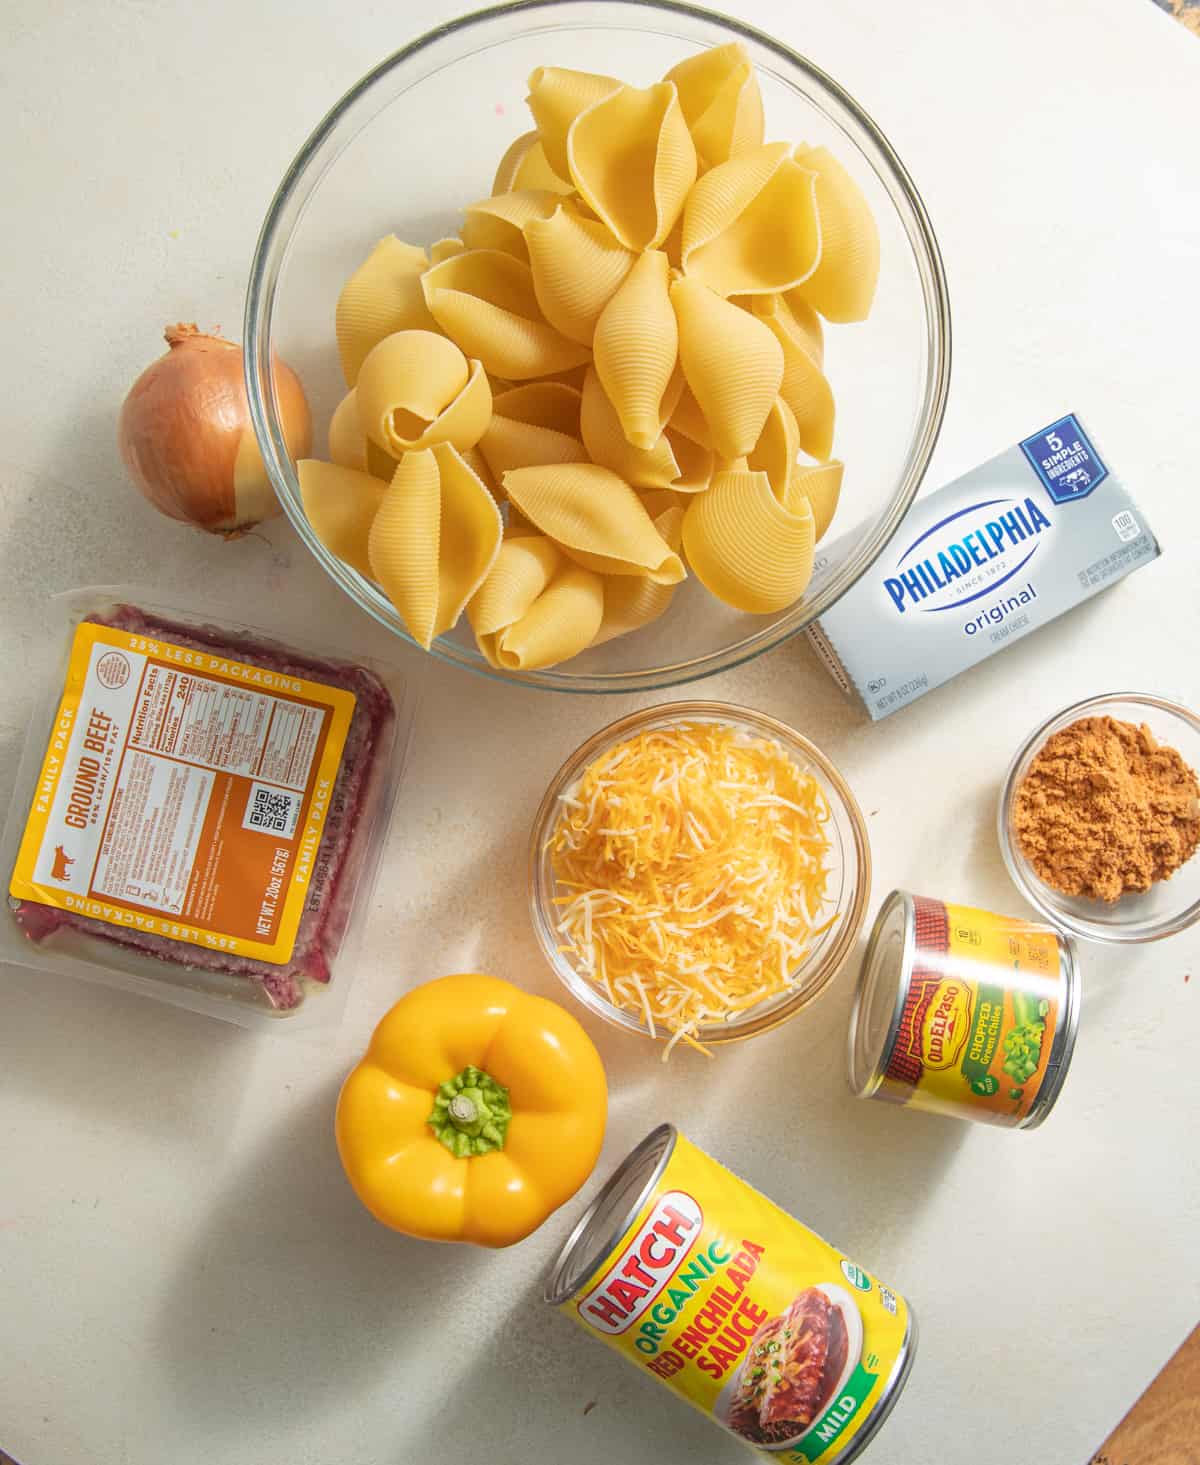 Ingredients to make Mexican stuffed shells set out on a white surface.